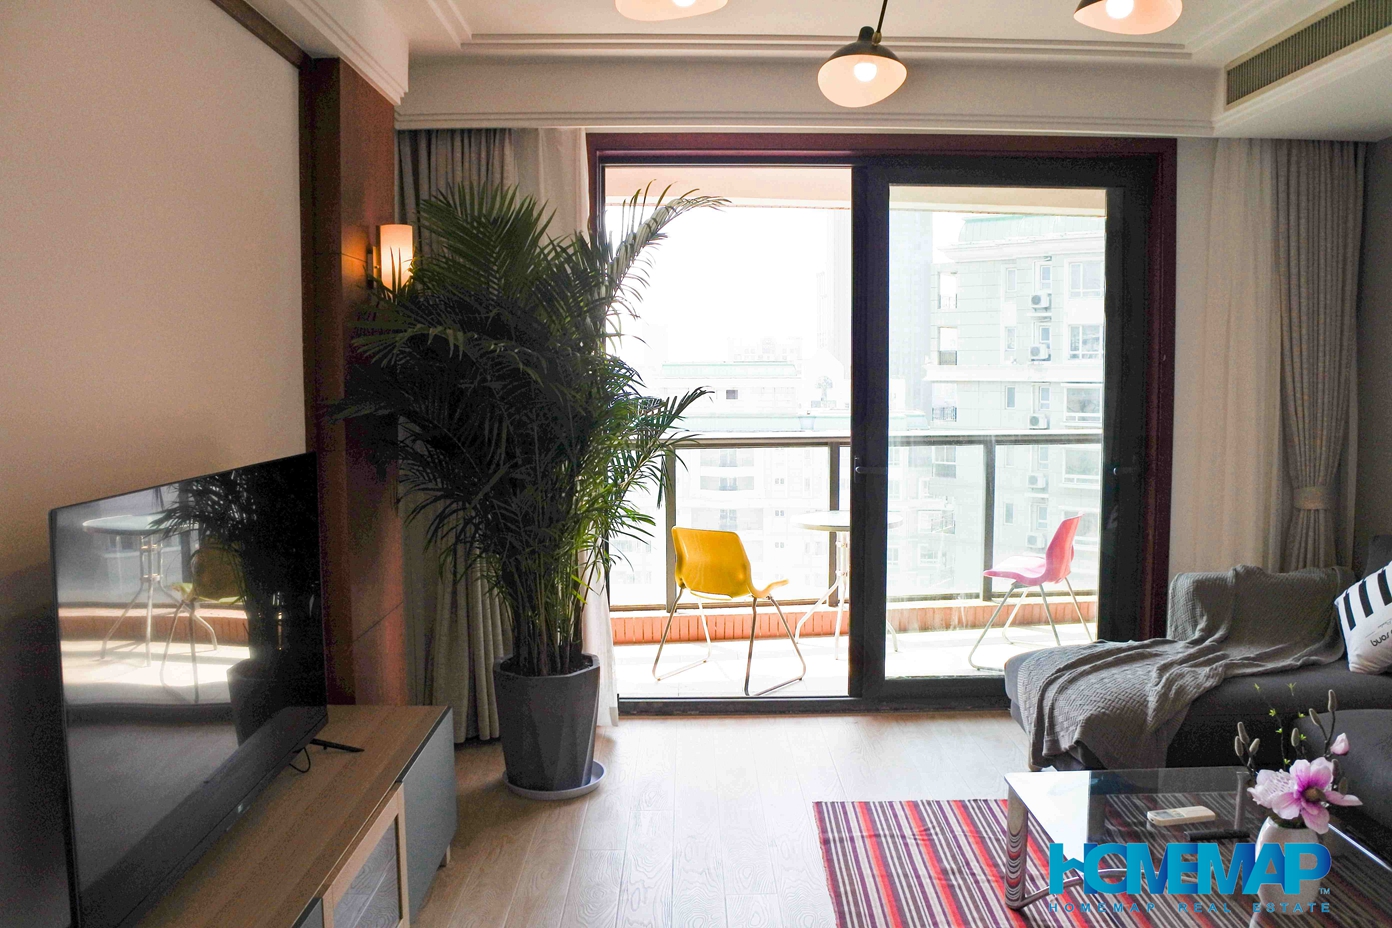 Spacious Exquisite 2 Brs Nr West Nanjing Rd